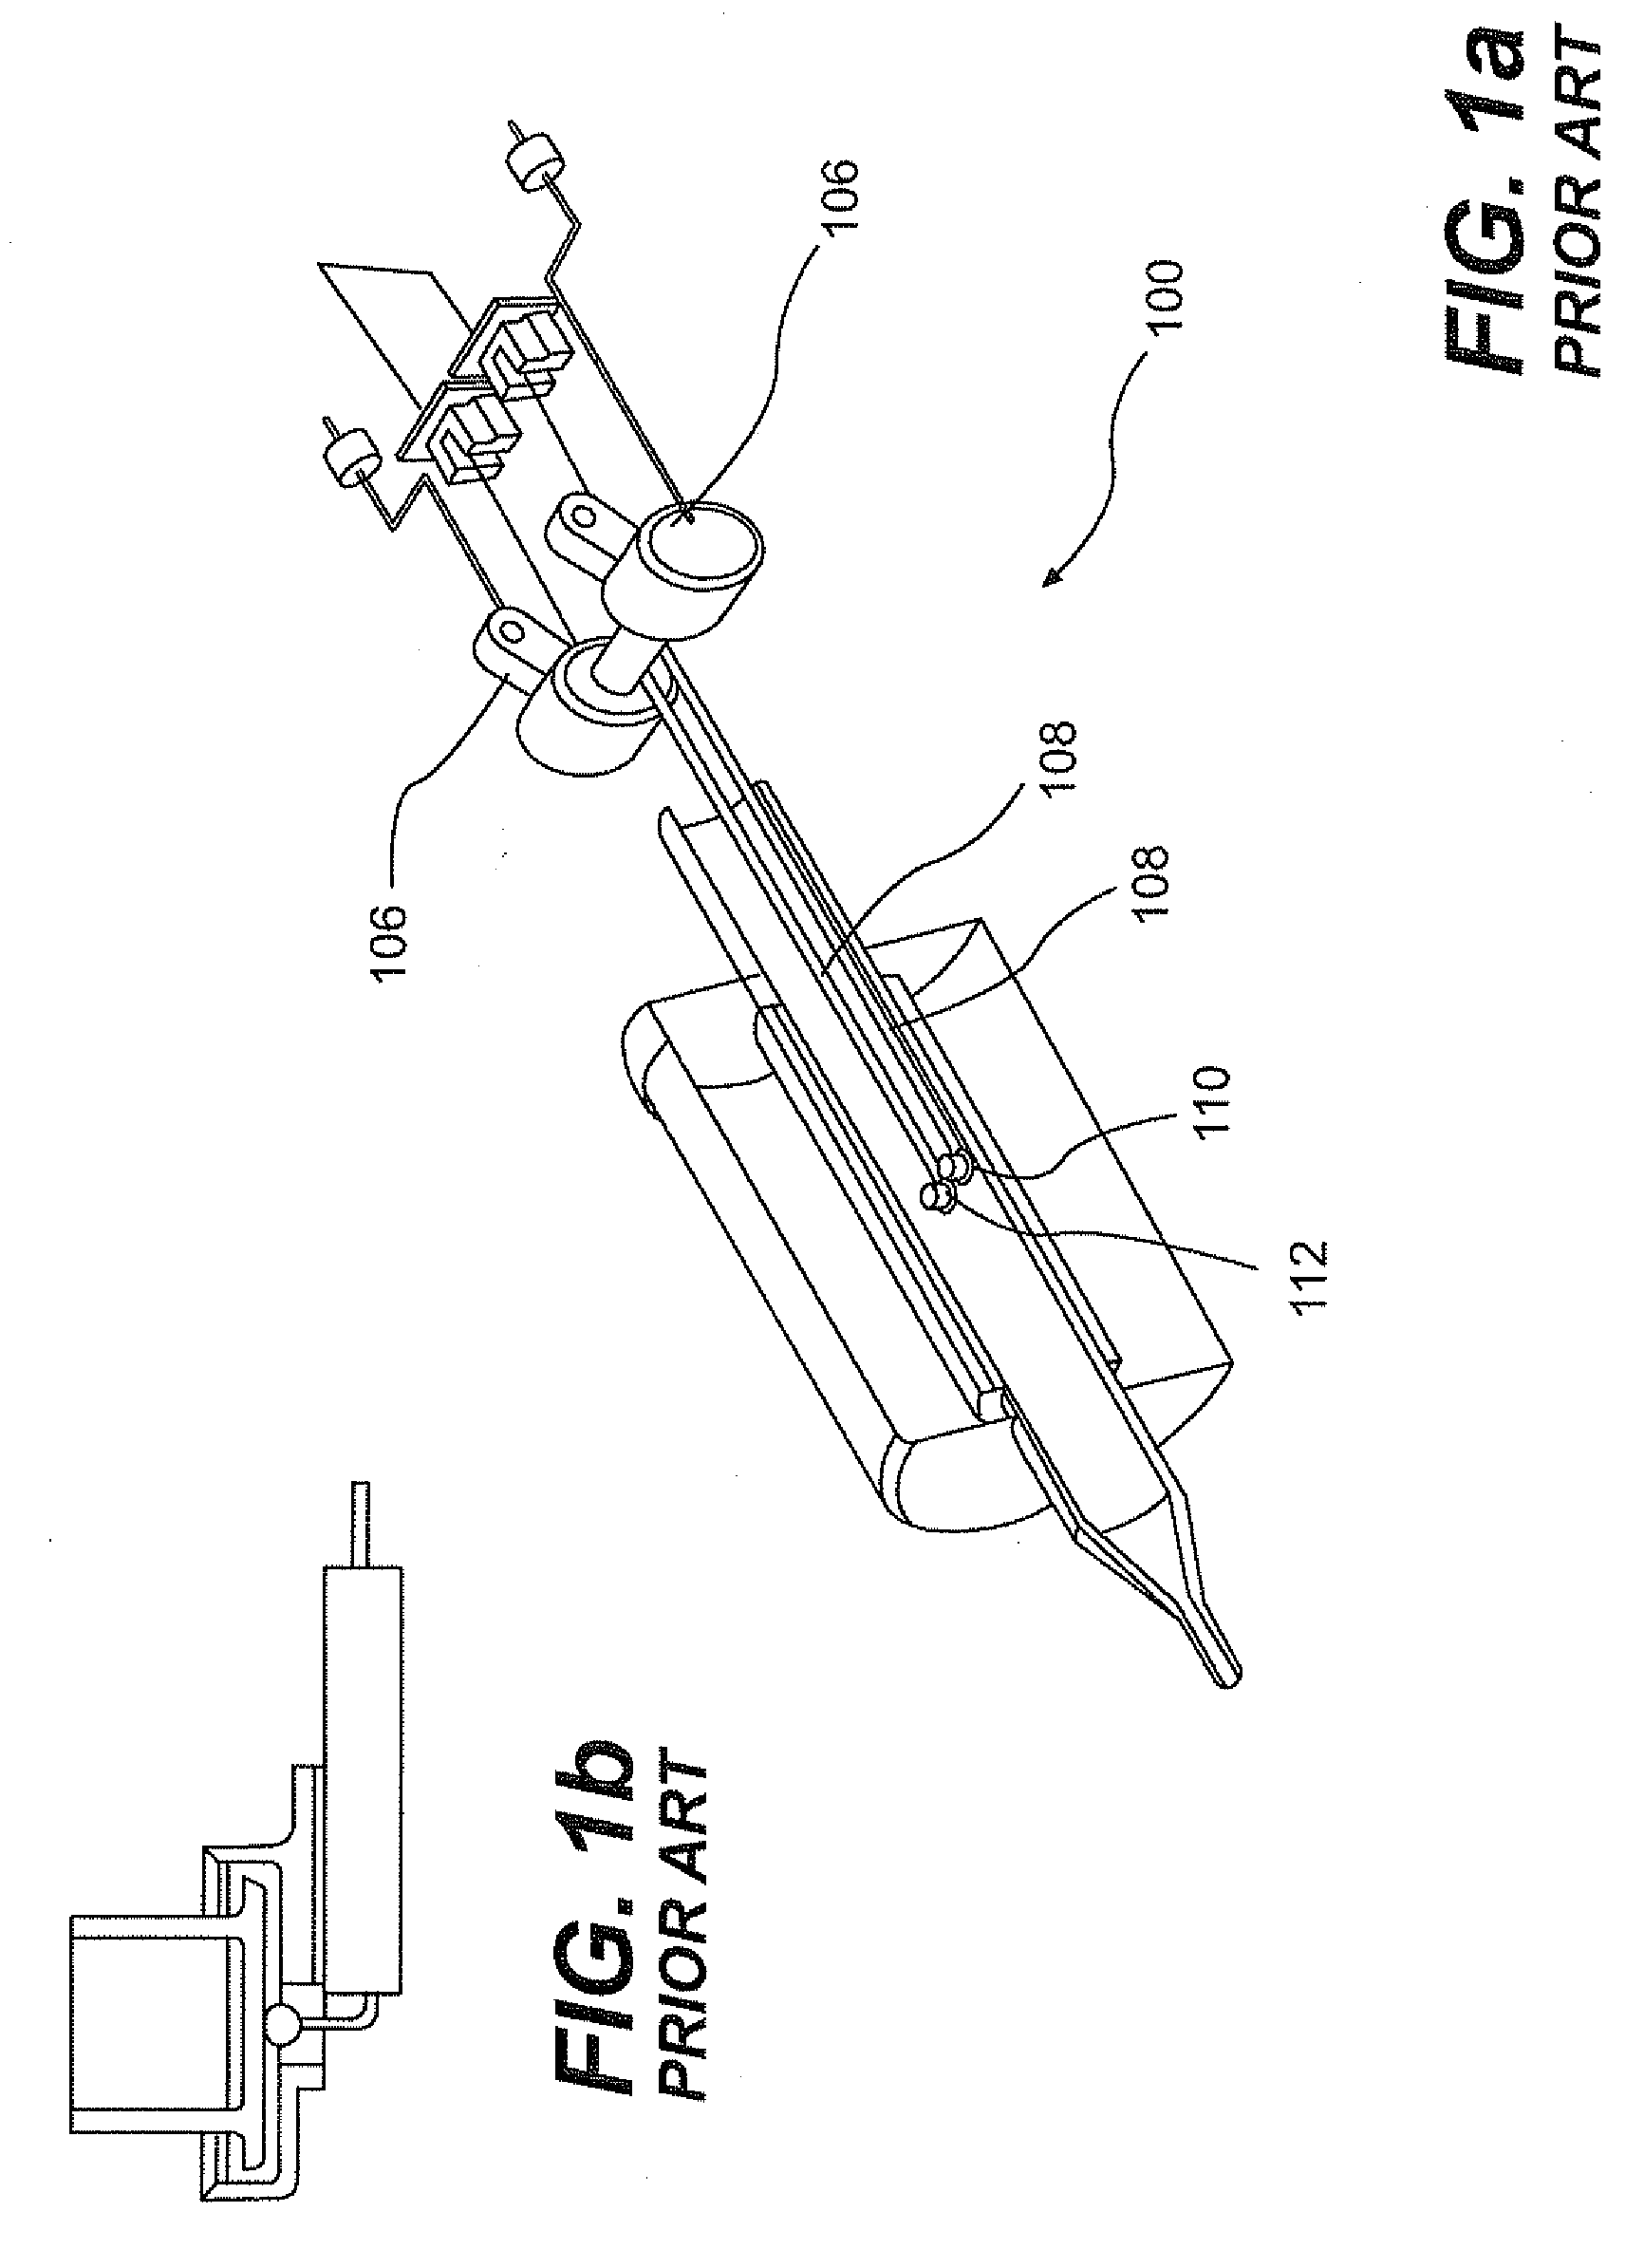 Simultaneous differential thermal analysis system